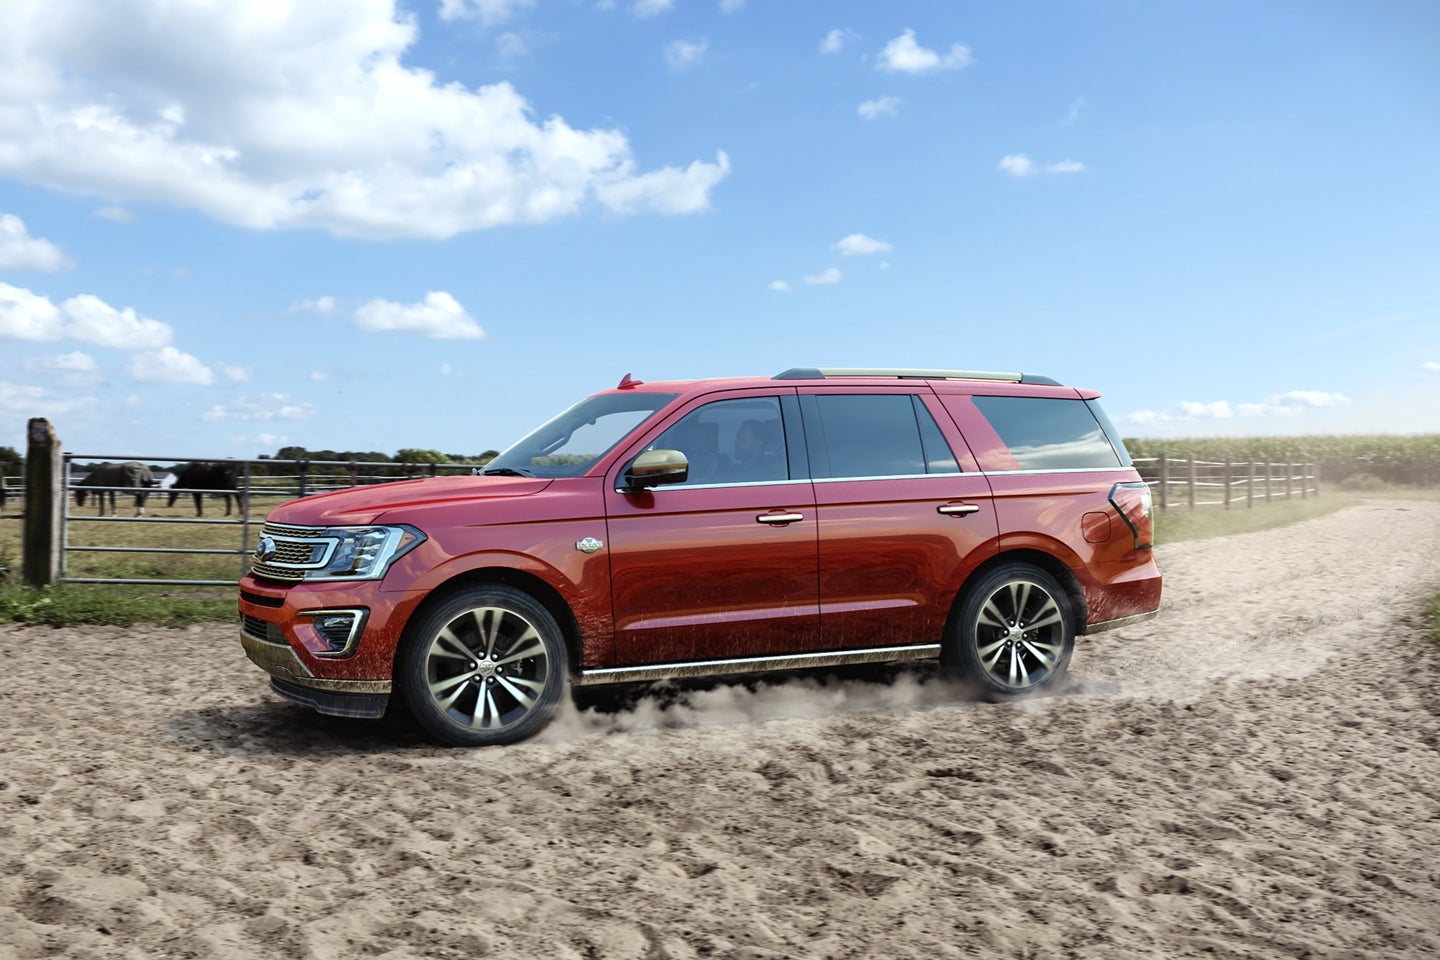 2020 Ford Expedition for Sale near Enterprise, AL